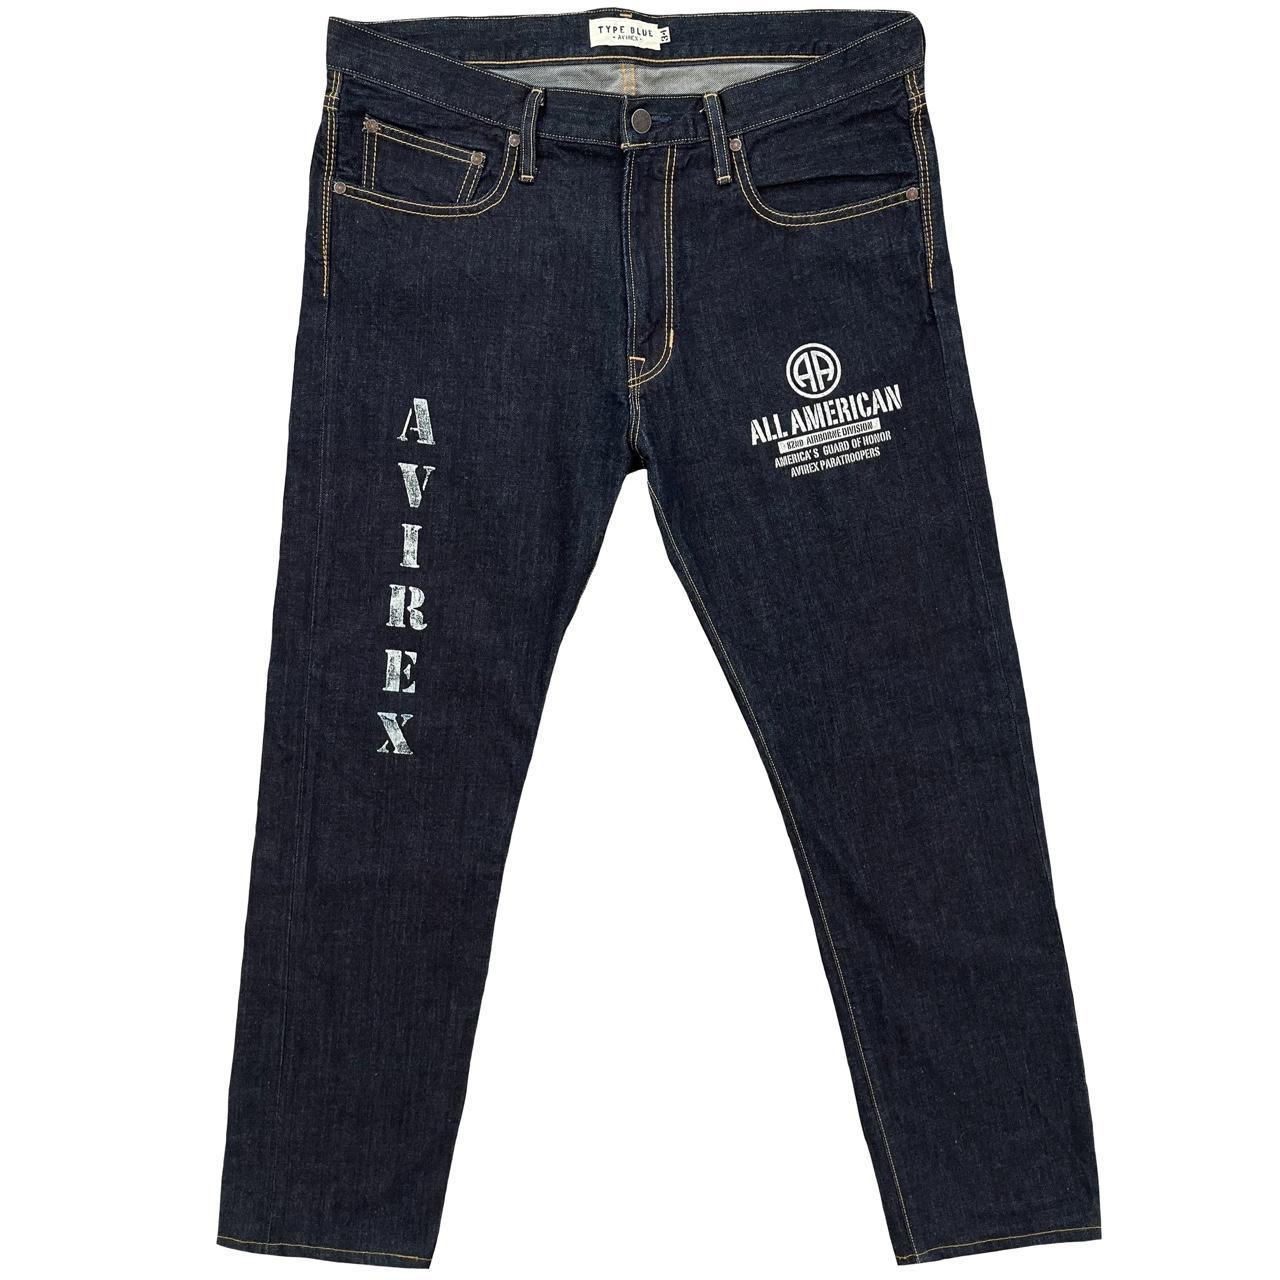 Avirex Jeans - Known Source